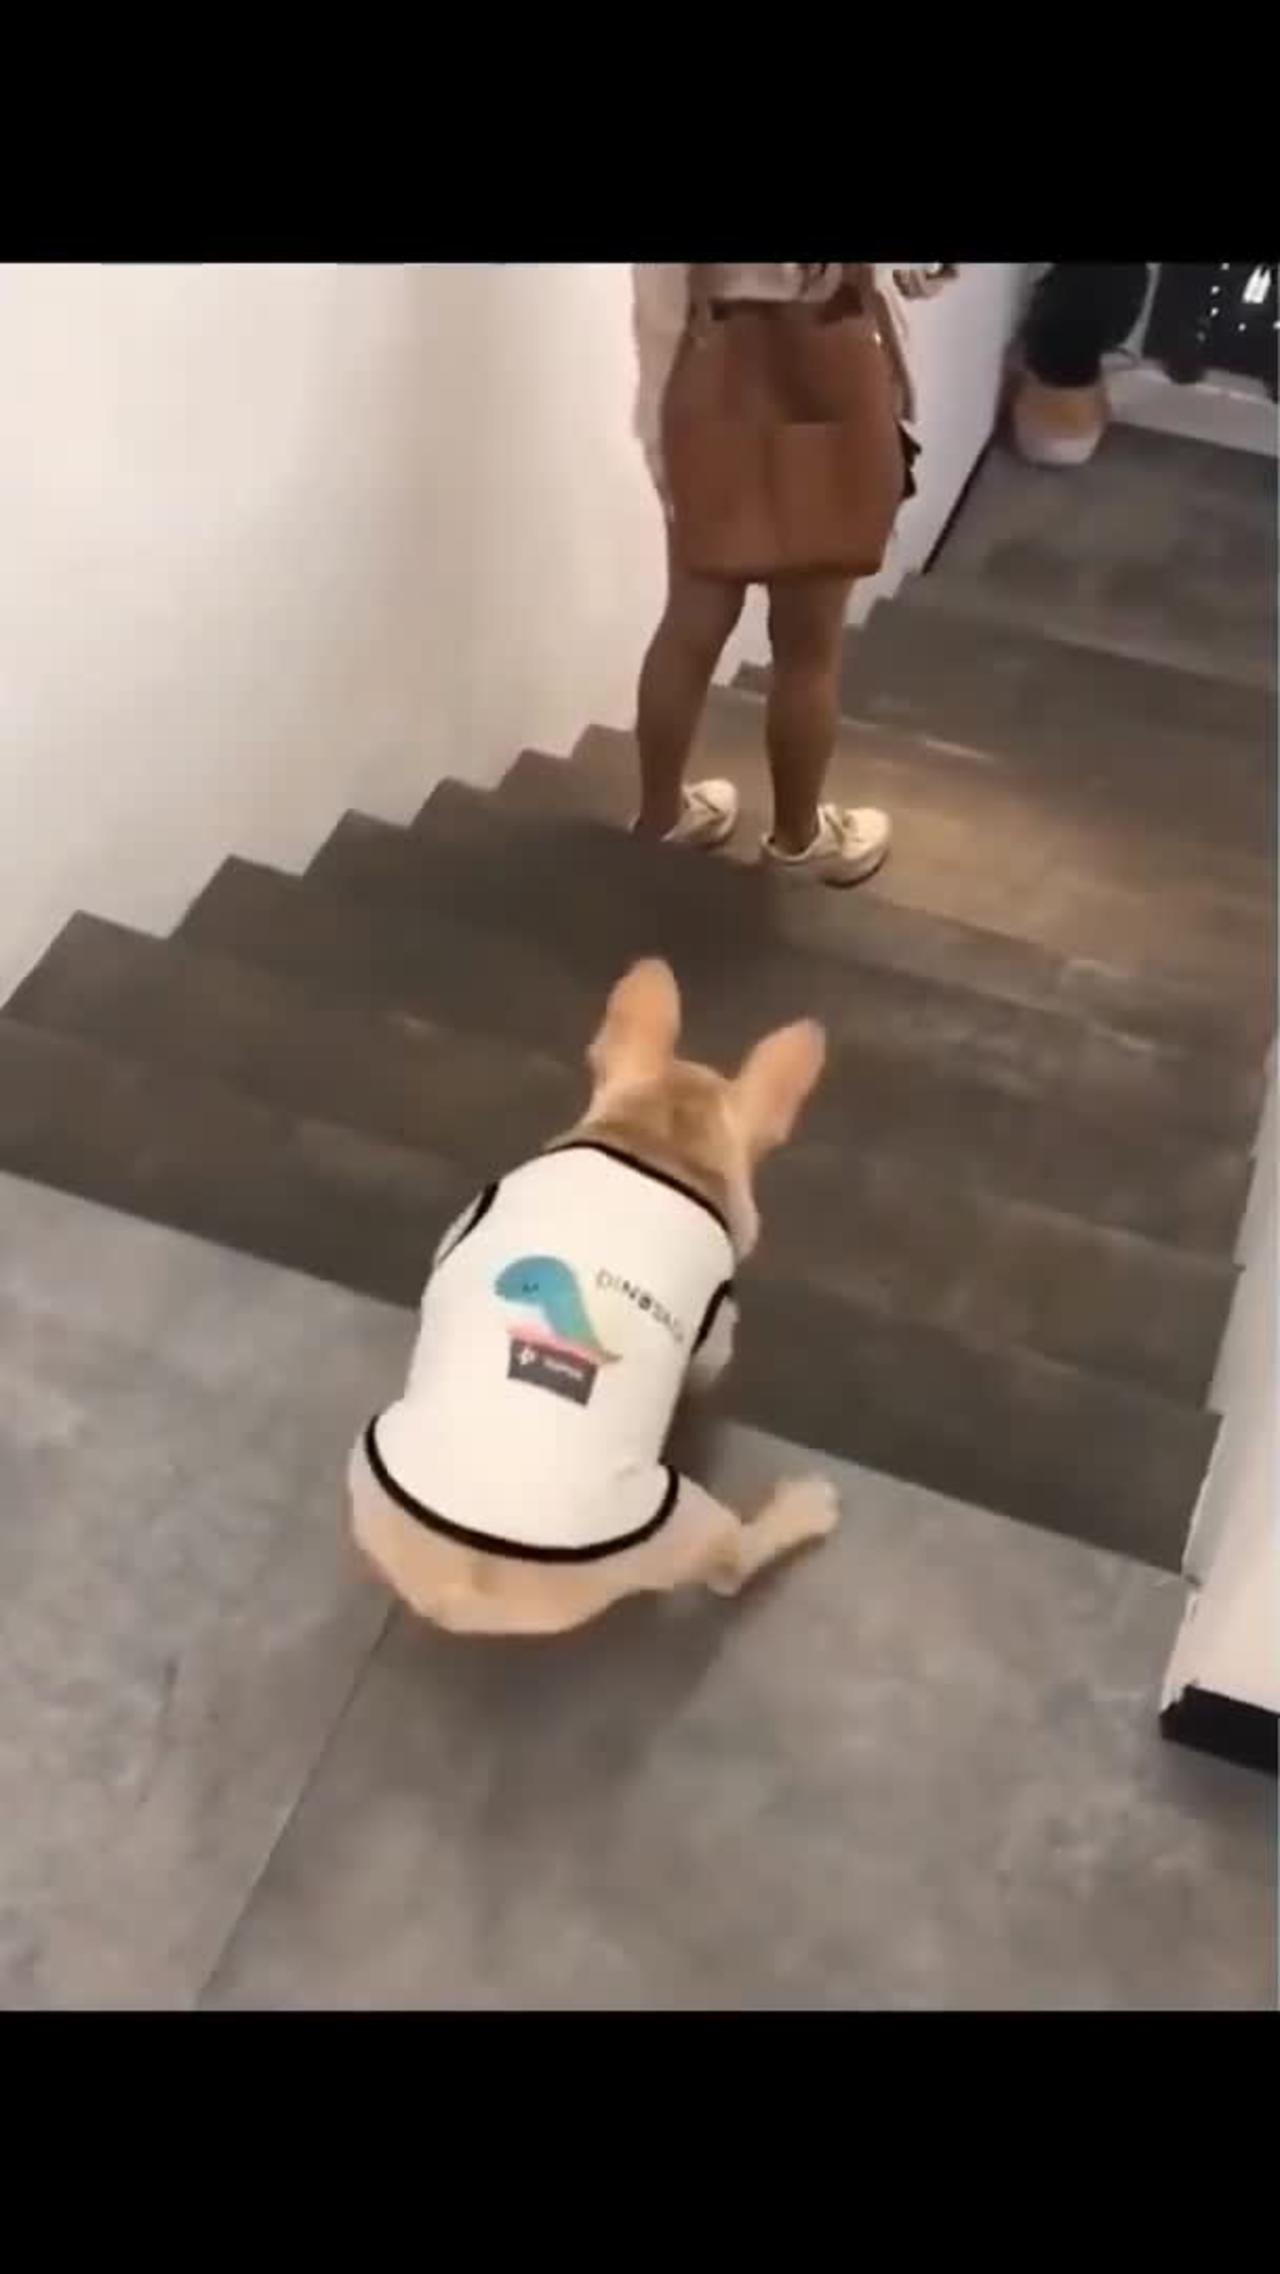 Funny dog walking down the steps 🤣🤣🤣